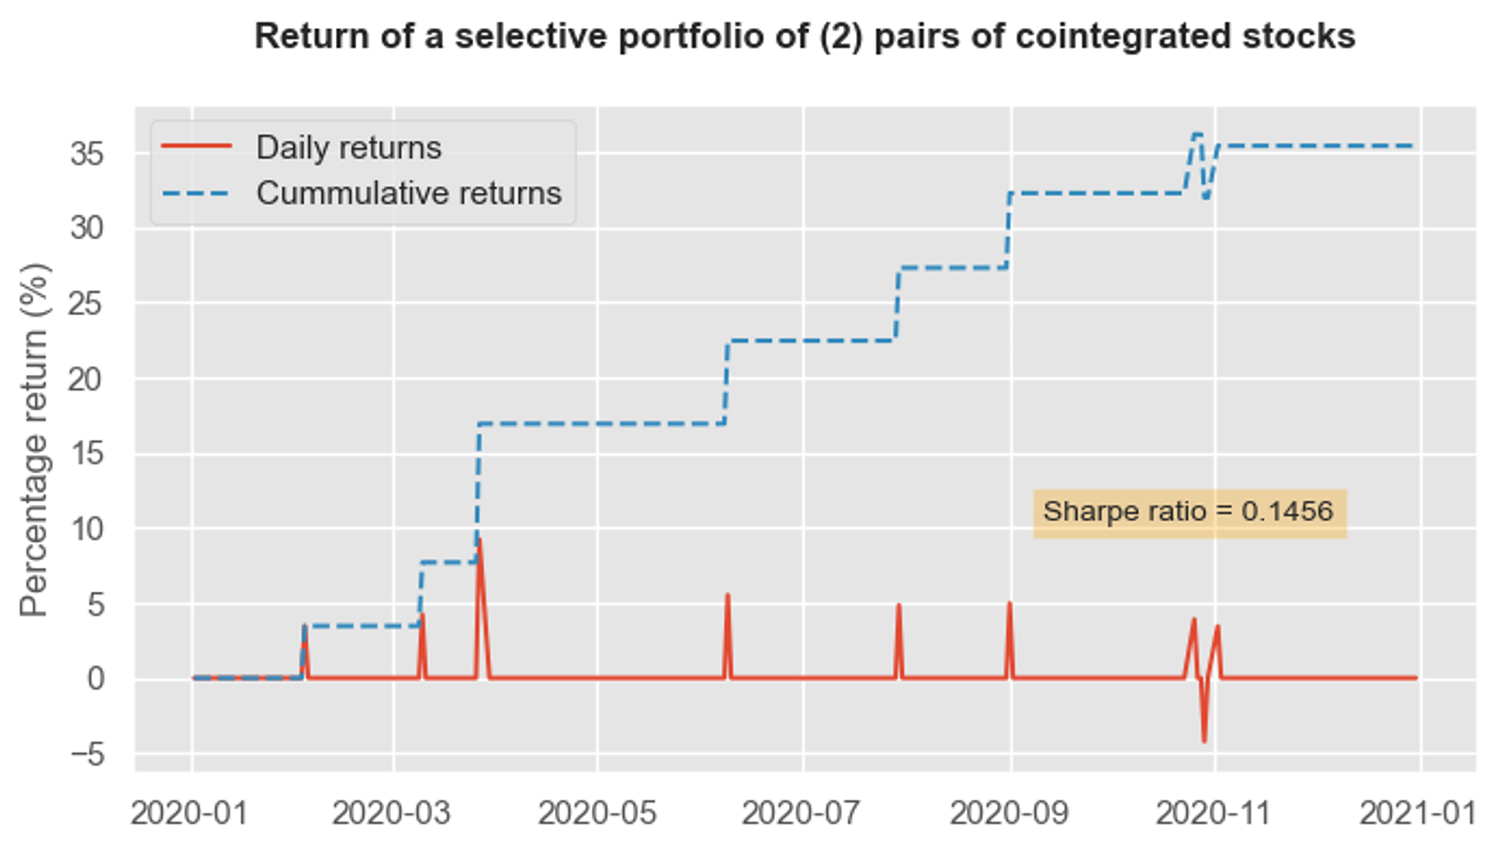 The portfolio backtest generated a cumulative return of ~35% over the calendar year 2020, outperforming the benchmark on risk-adjusted return with a sharpe ratio of 0.1456.